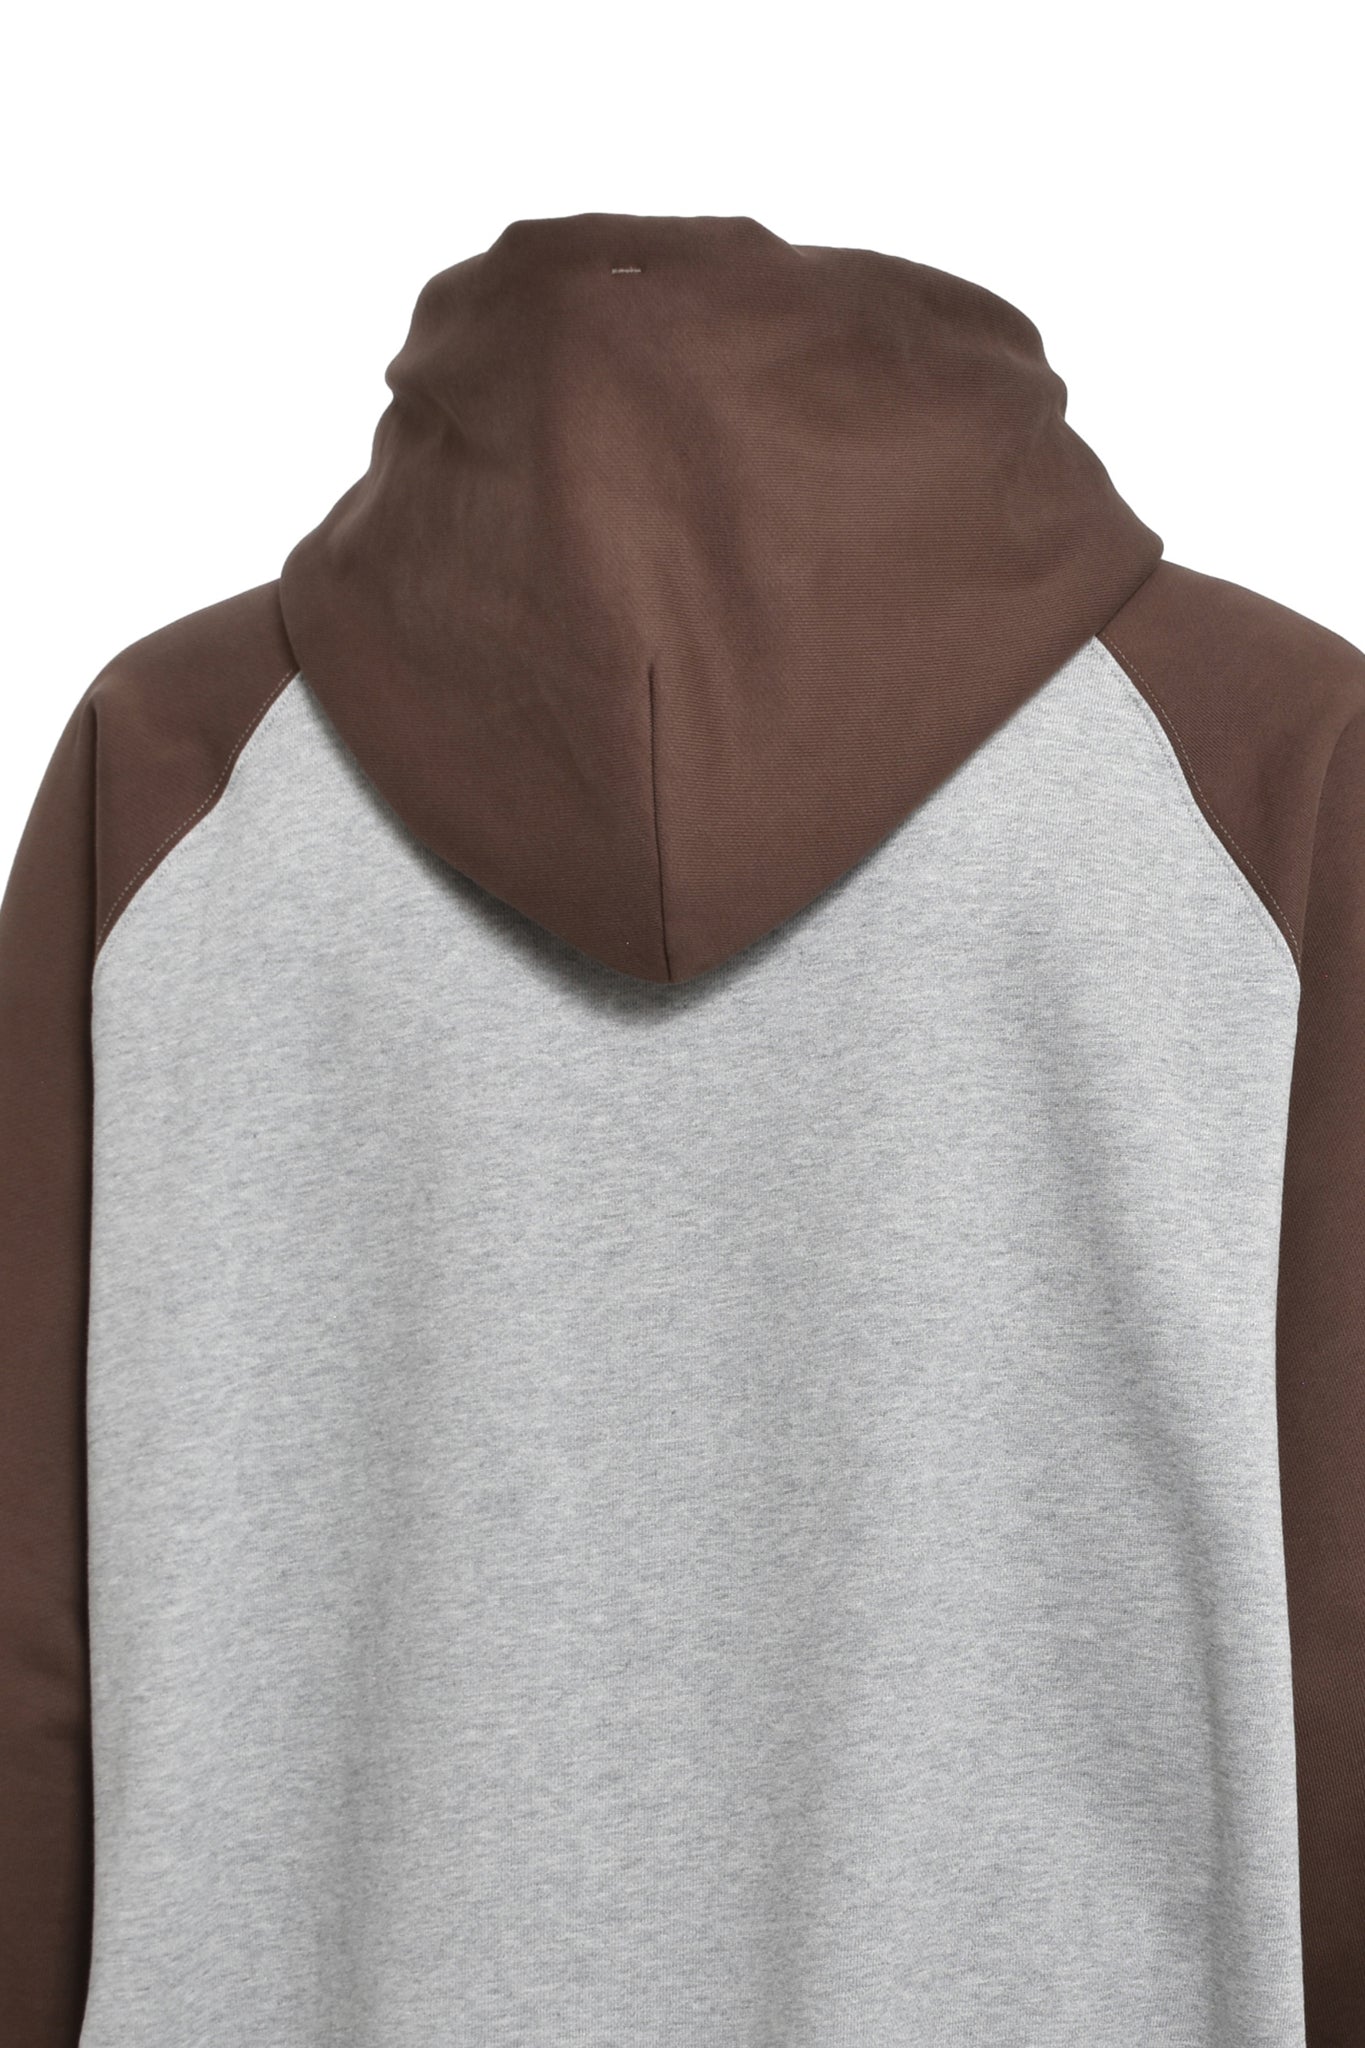 TWO TONE EMBROIDERY HOODIE / BROWN H.GREY